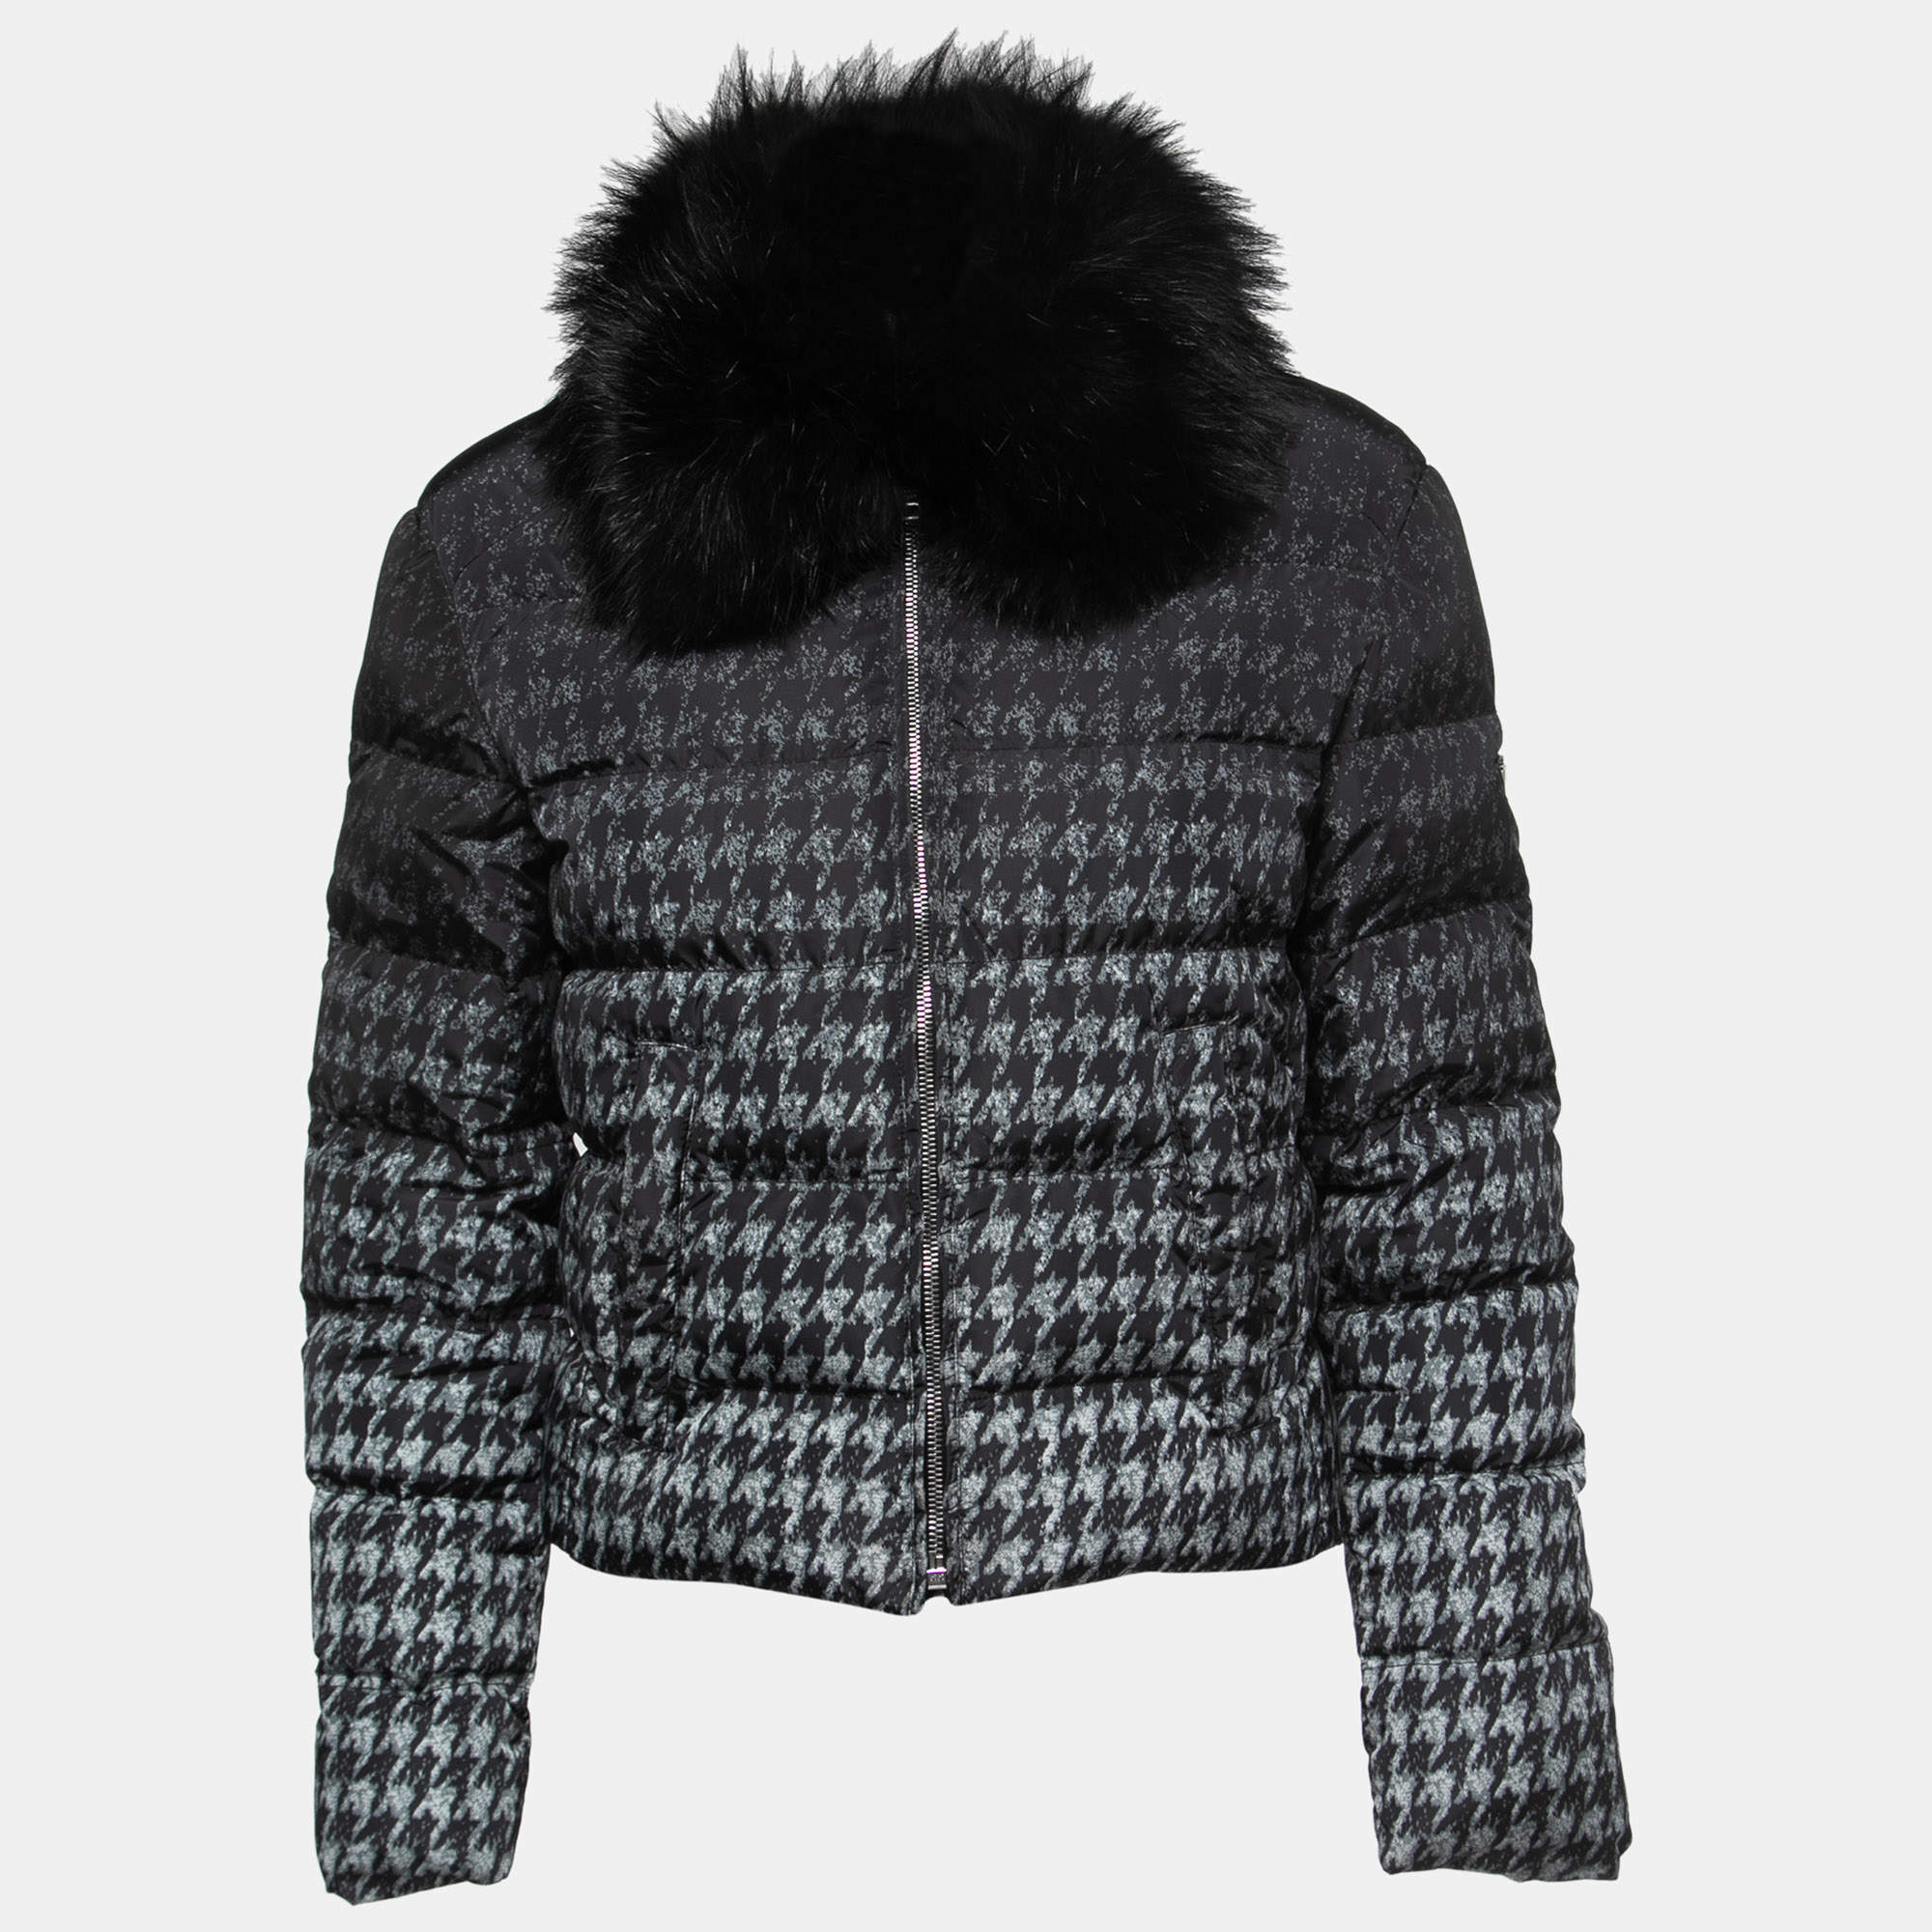 Prada Grey Houndstooth Printed Synthetic Fox Fur Collar Cropped Jacket S